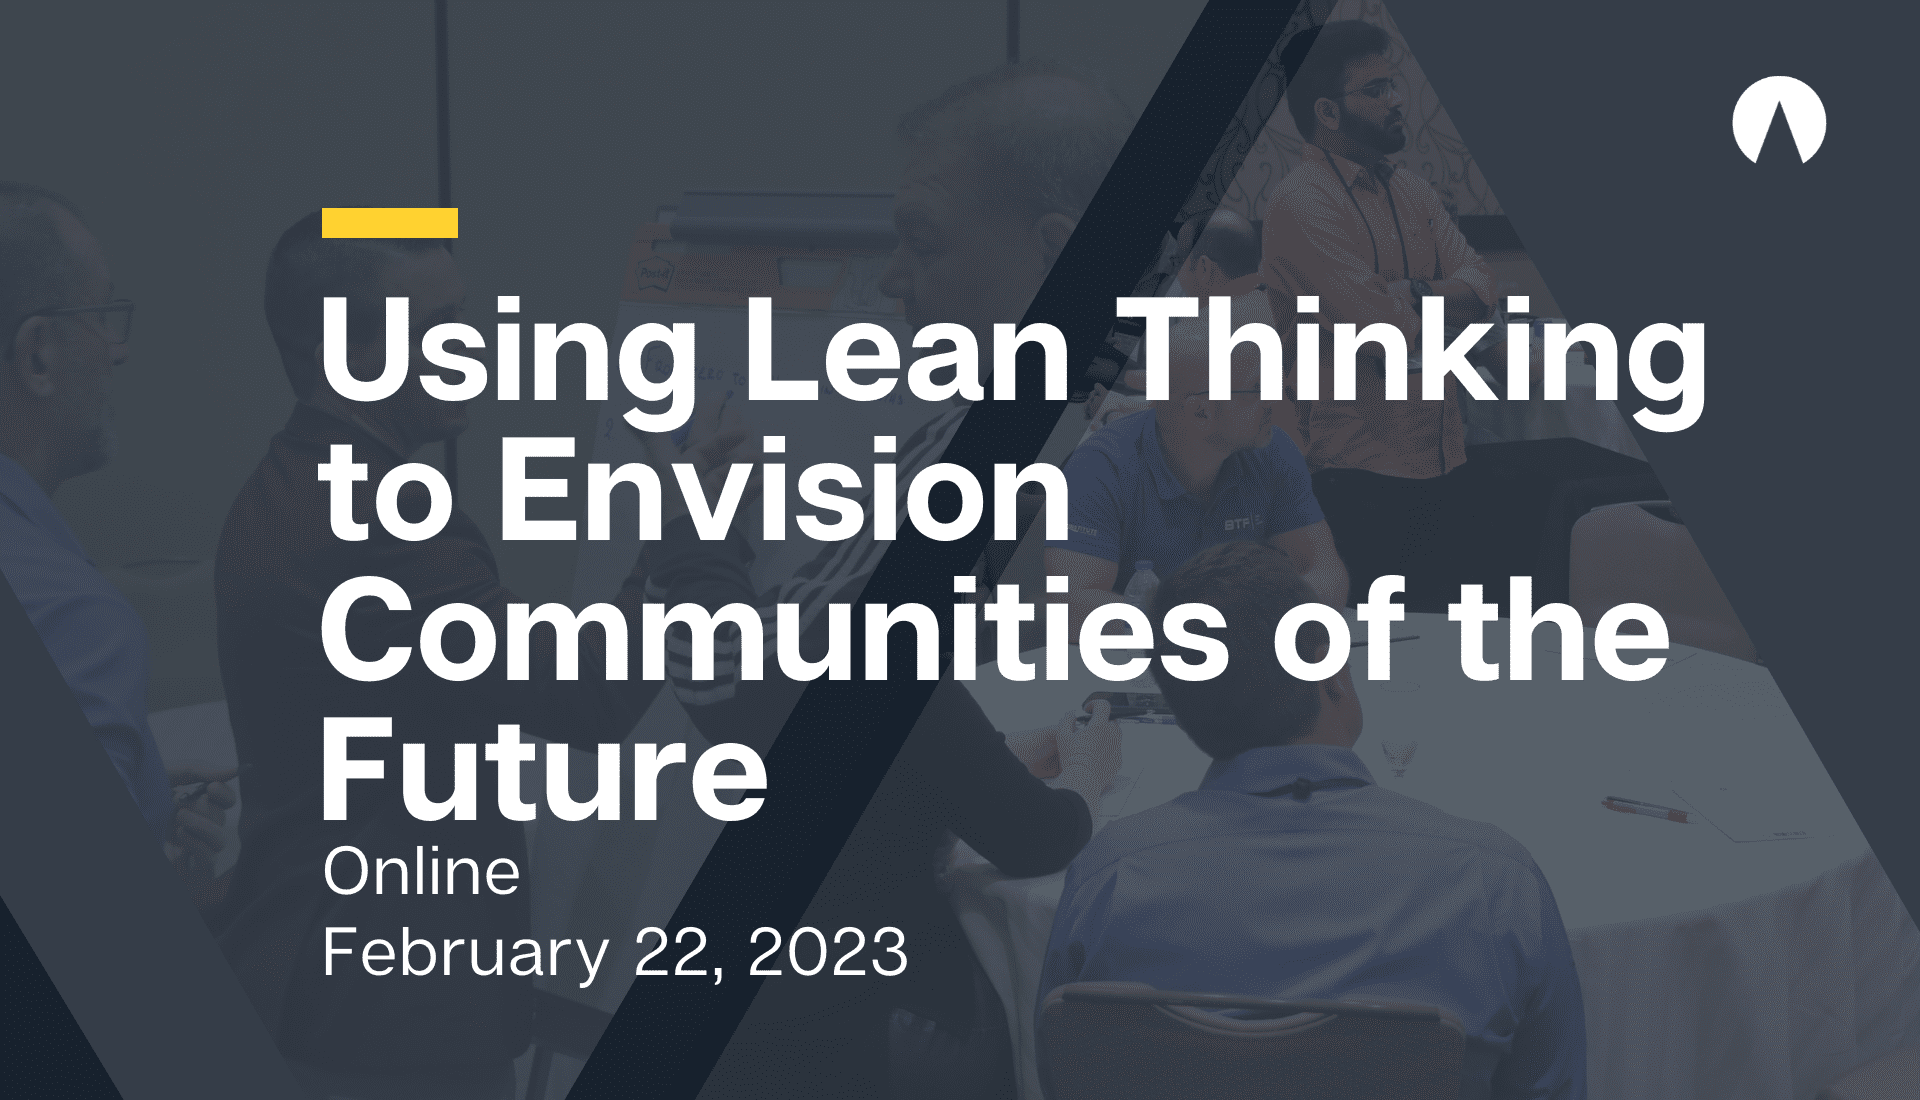 Using Lean Thinking to Envision Communities of the Future